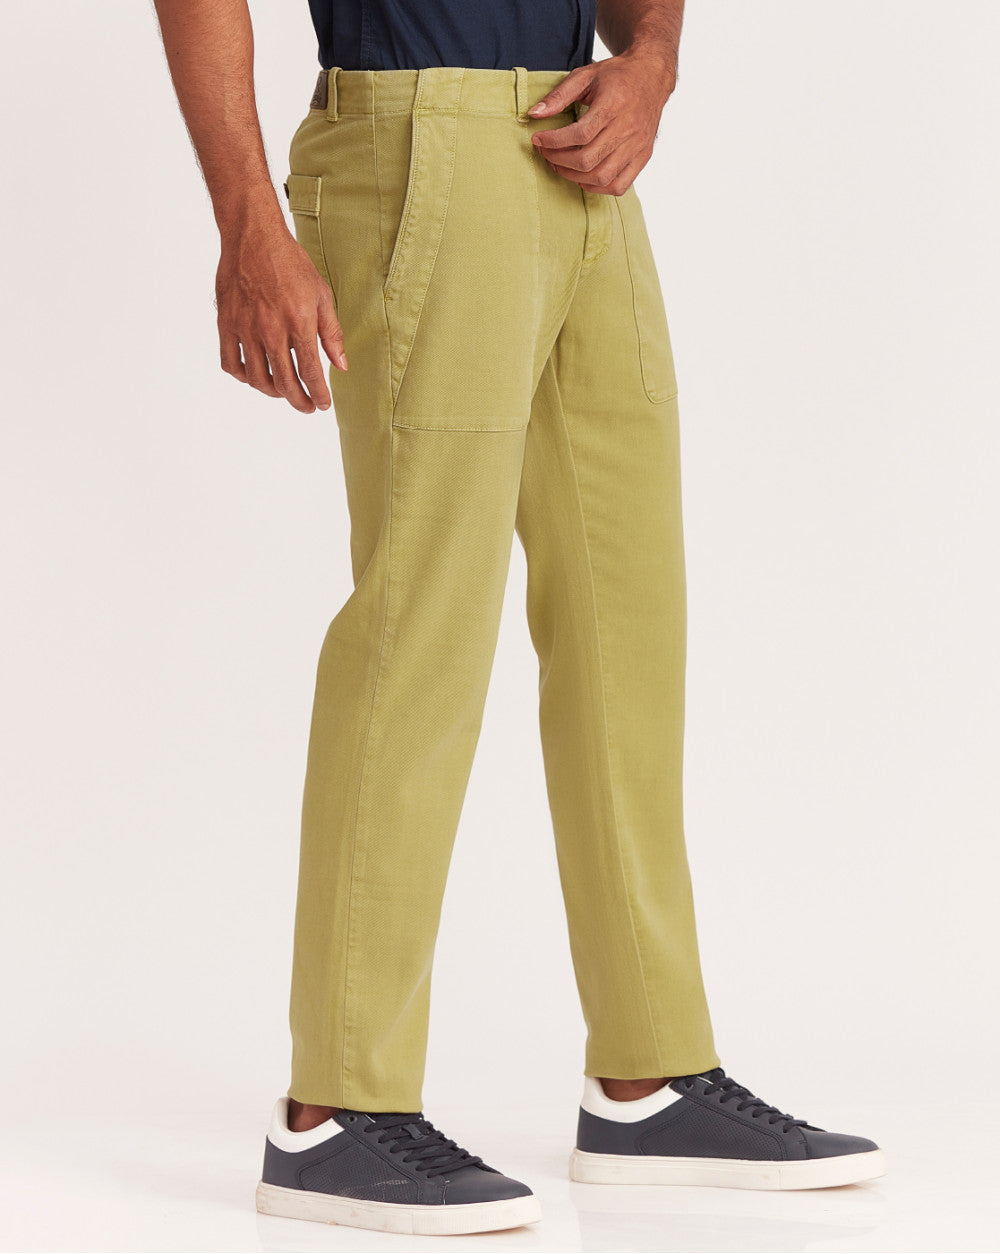 Straight Fit Garment Dyed Outdoor Chinos - Light Olive